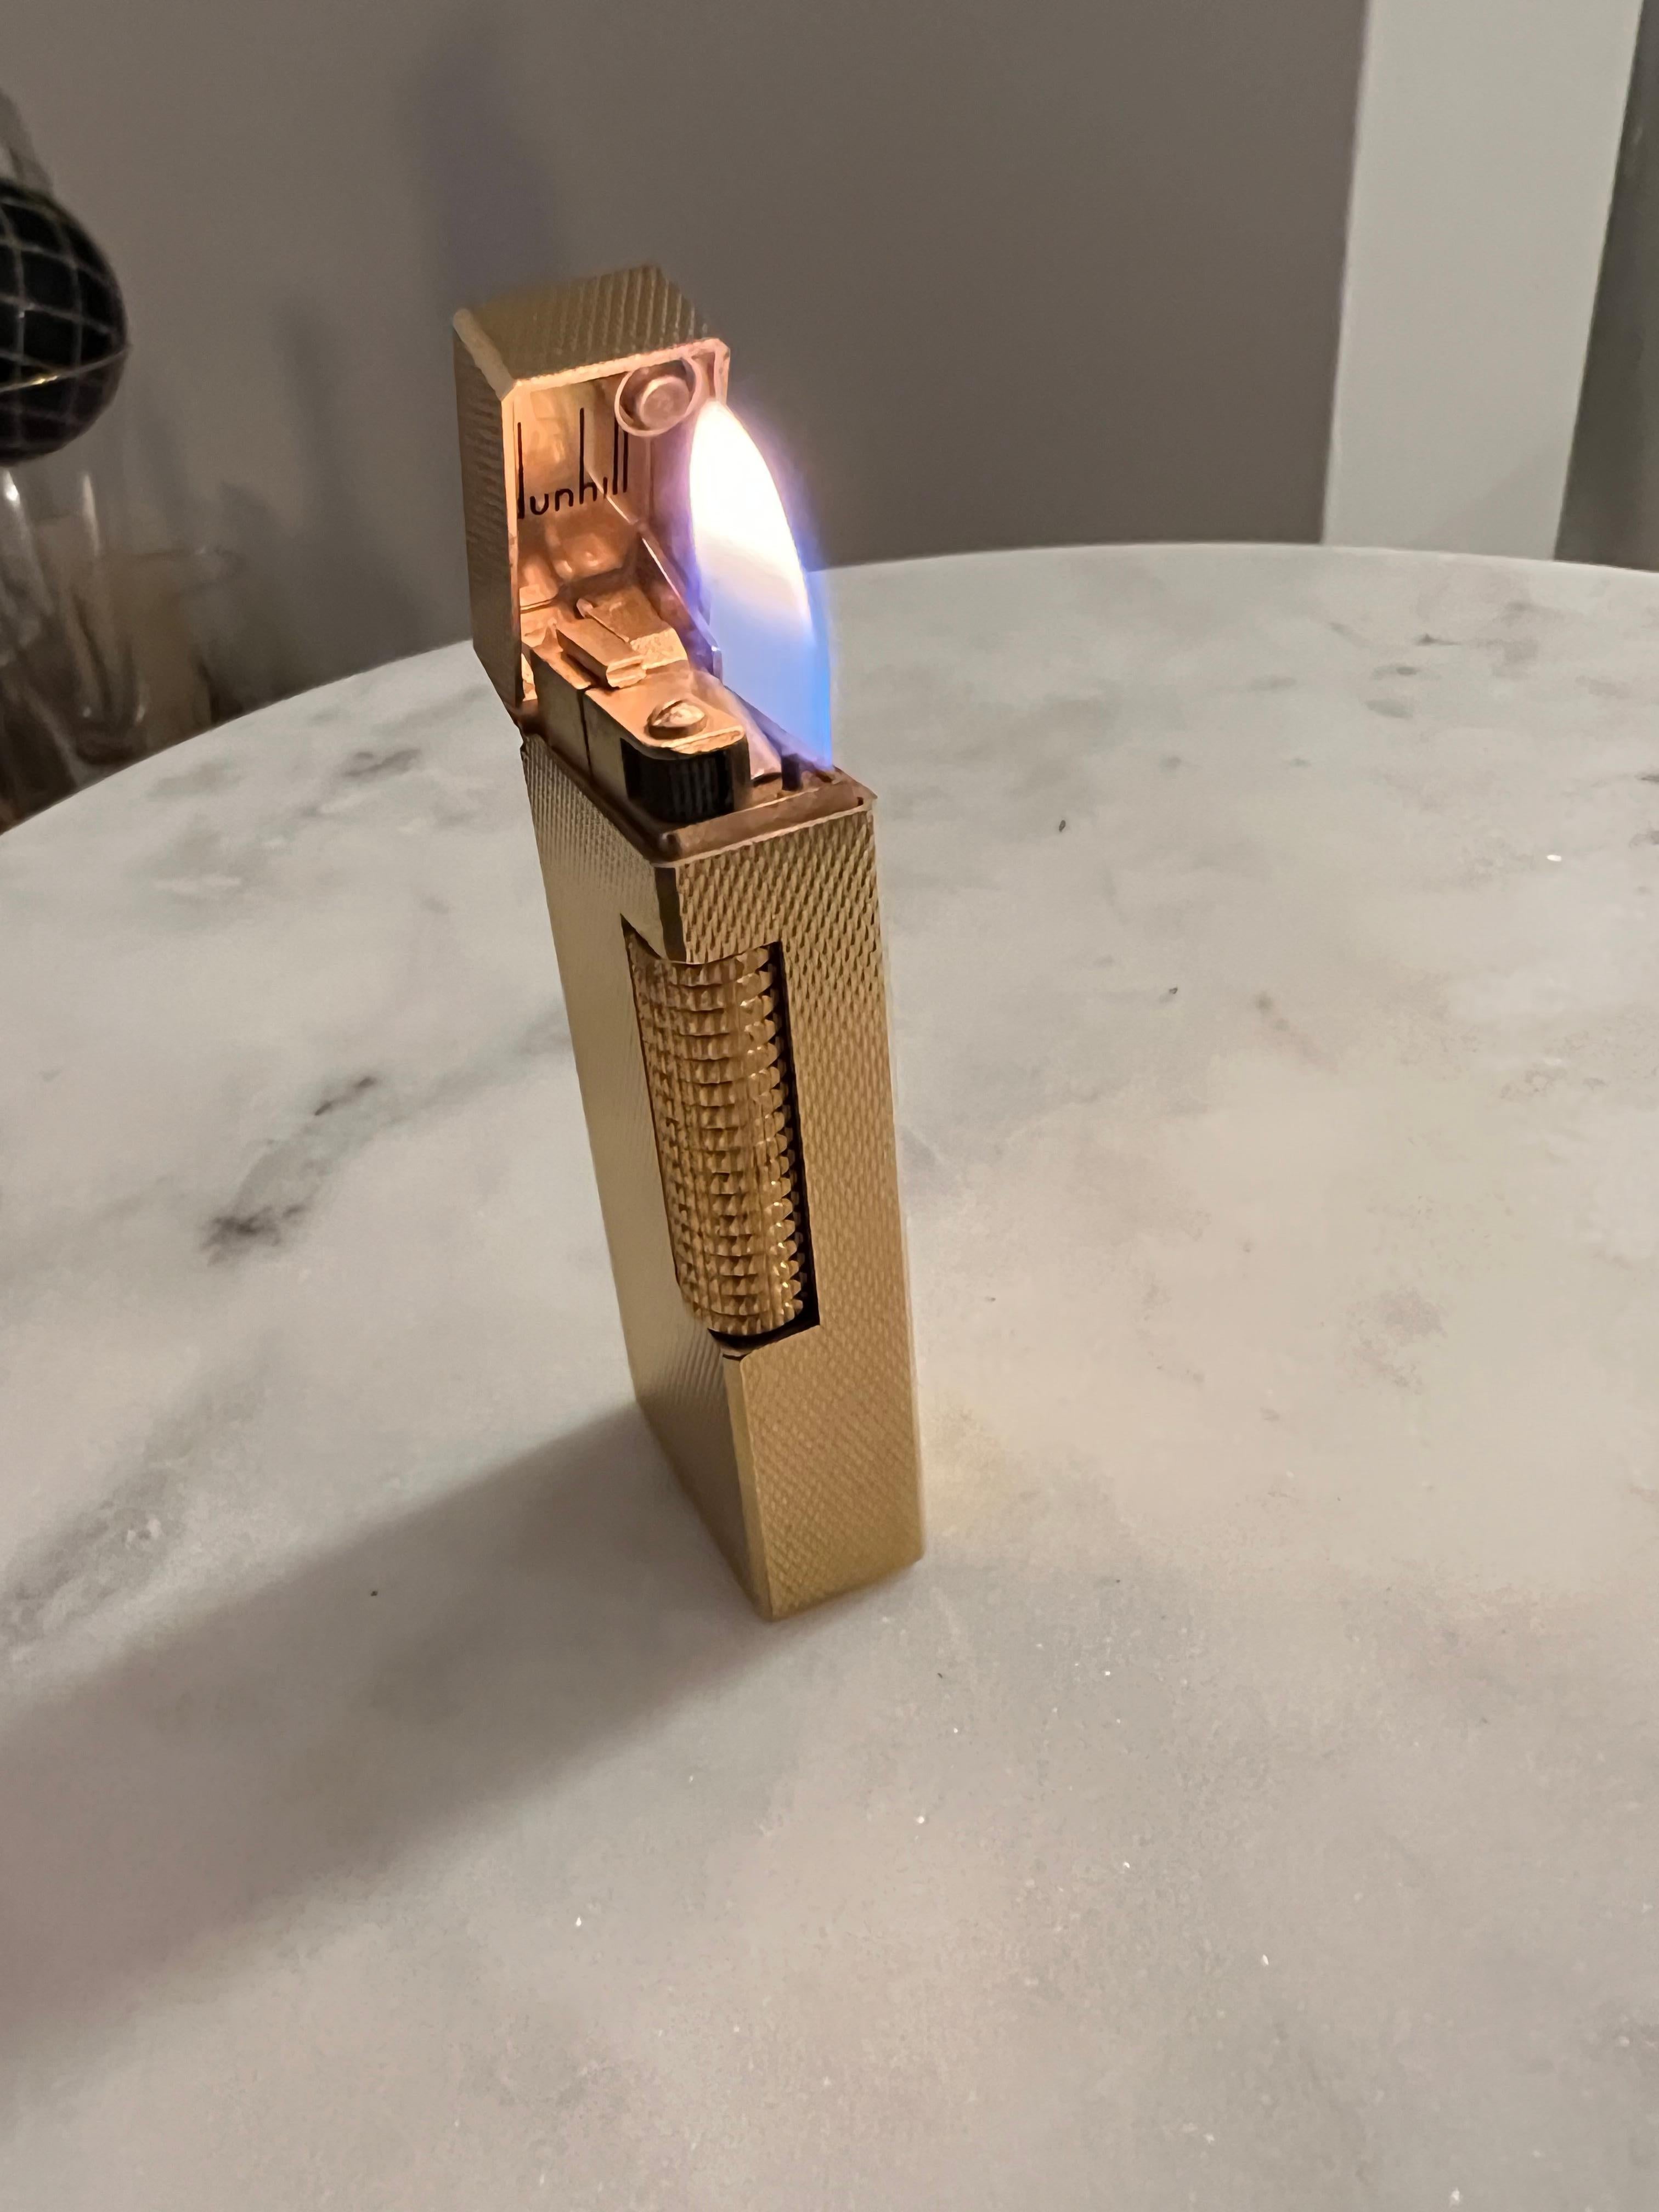 The James Bond Iconic and Rare Vintage Dunhill Gold and Swiss Made Lighter 9